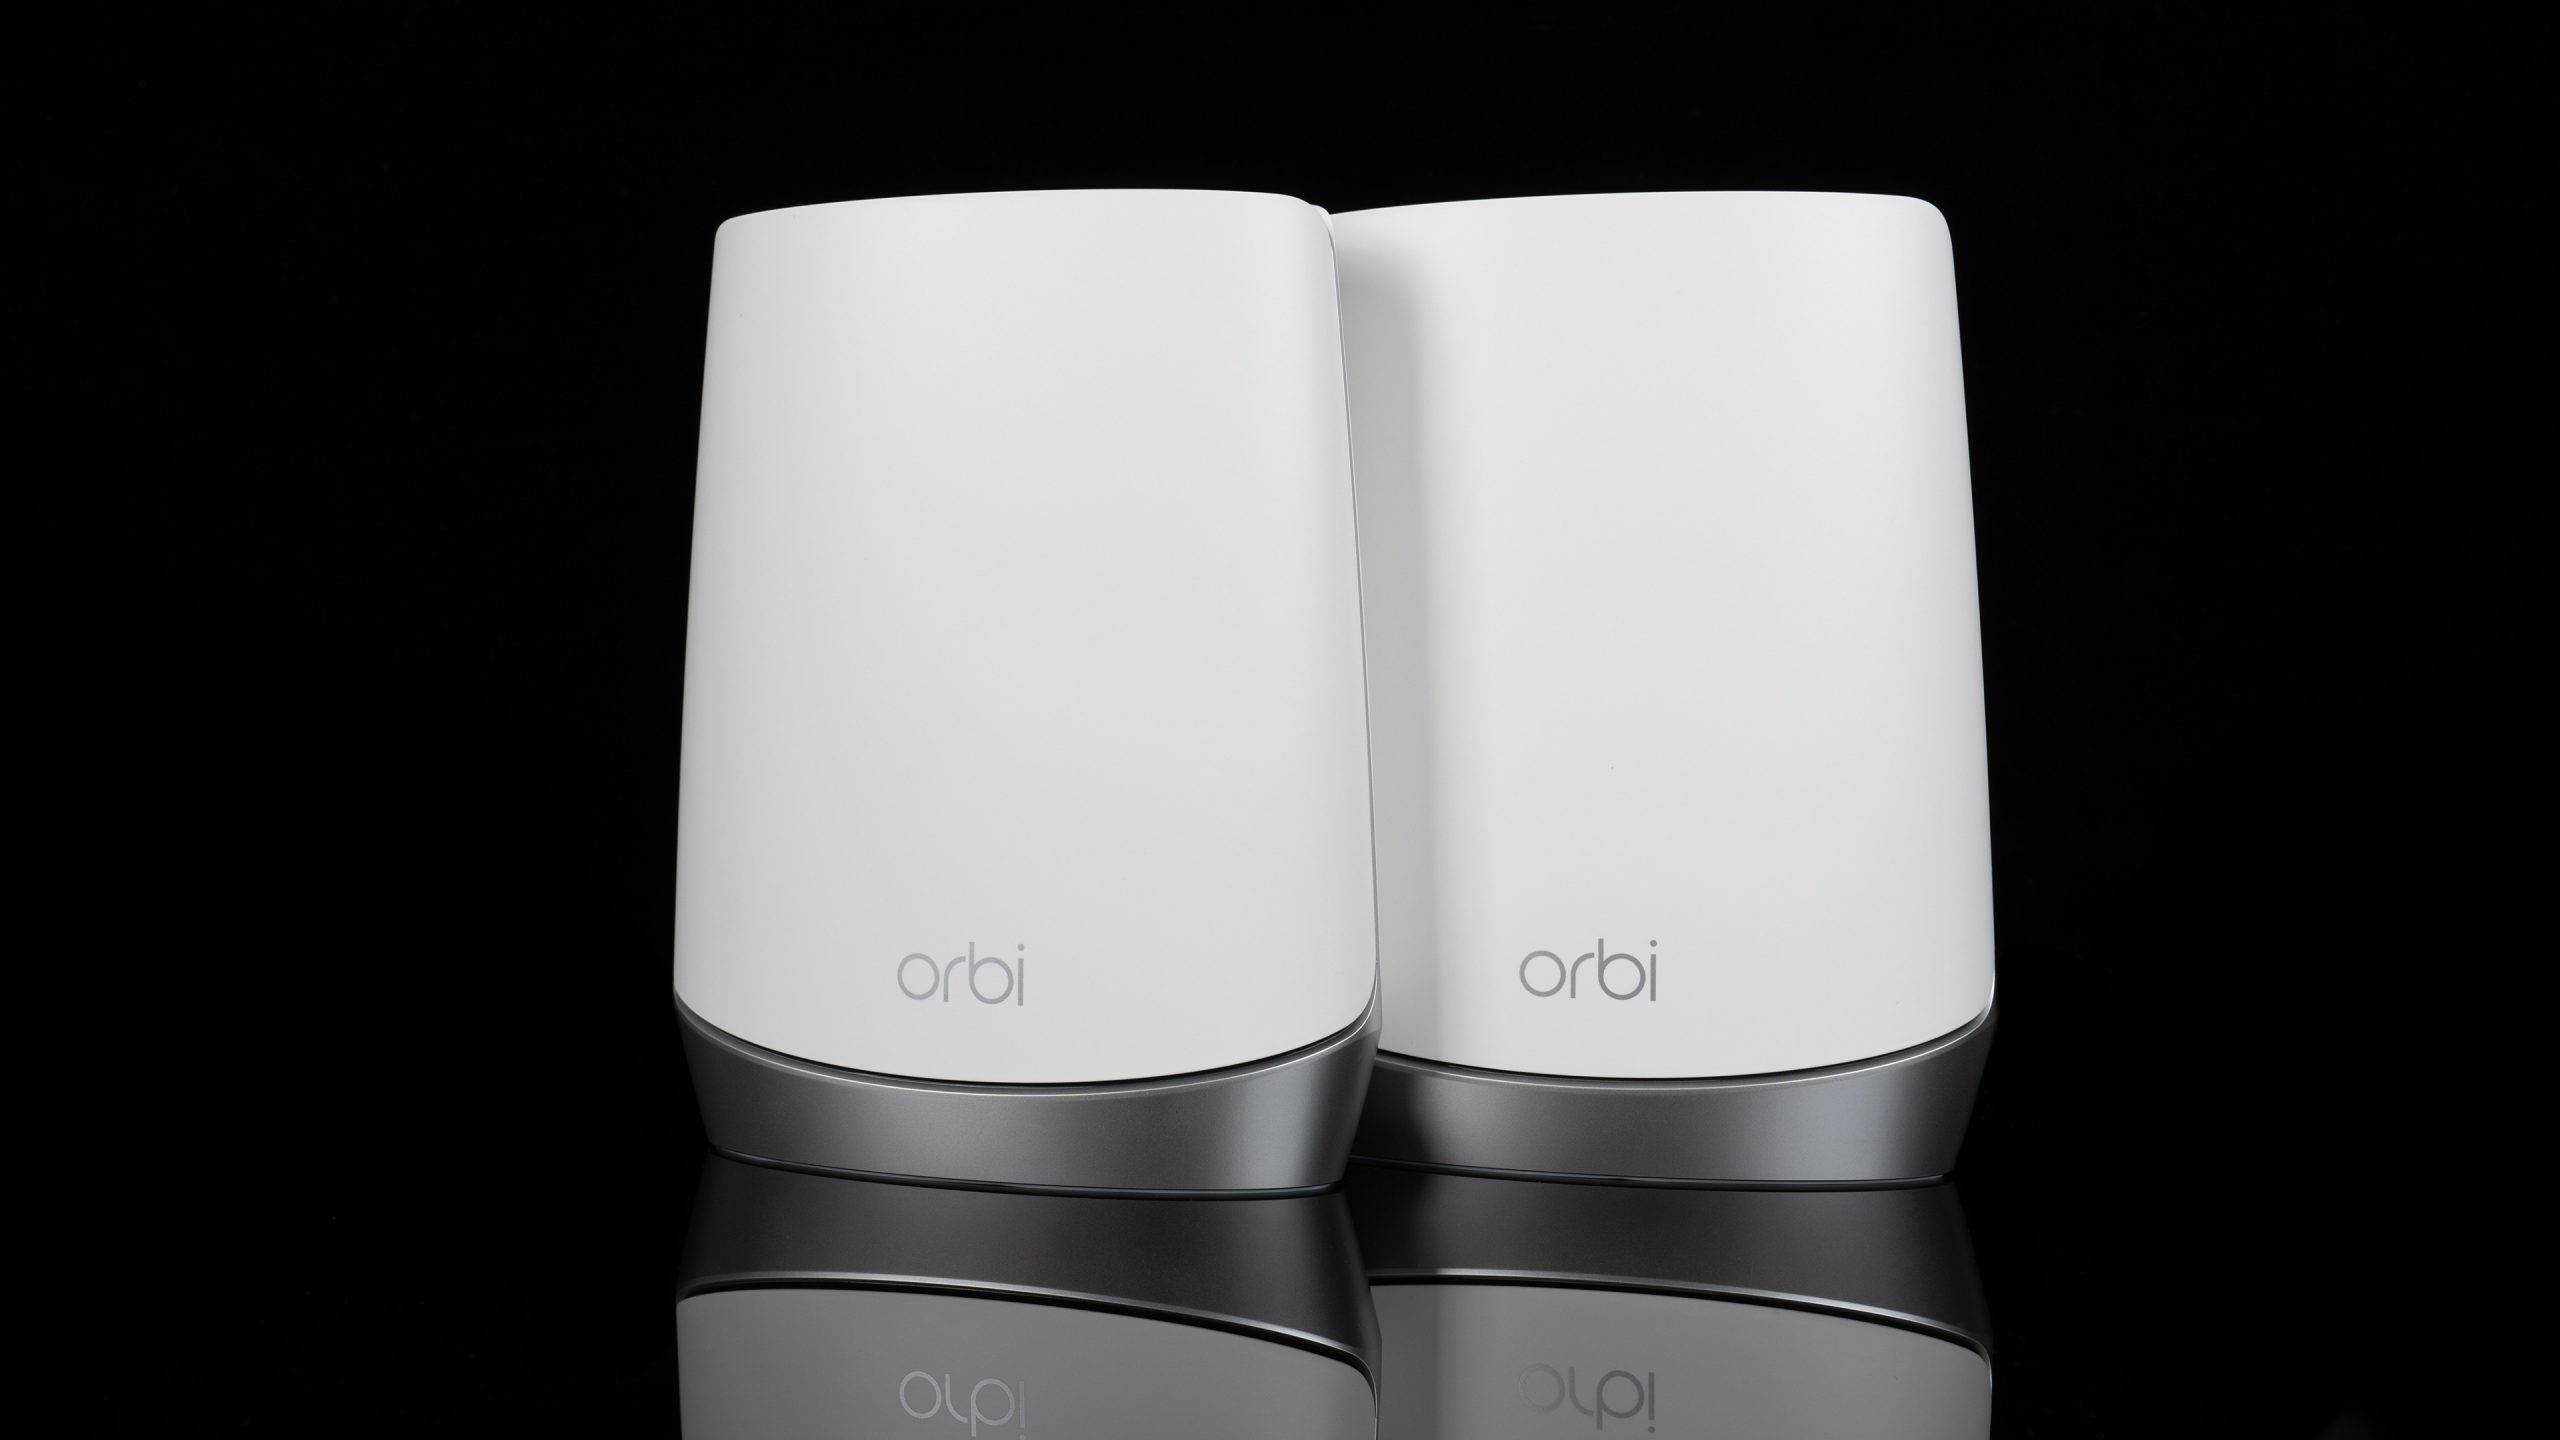 Orbi Ax4200 Review
